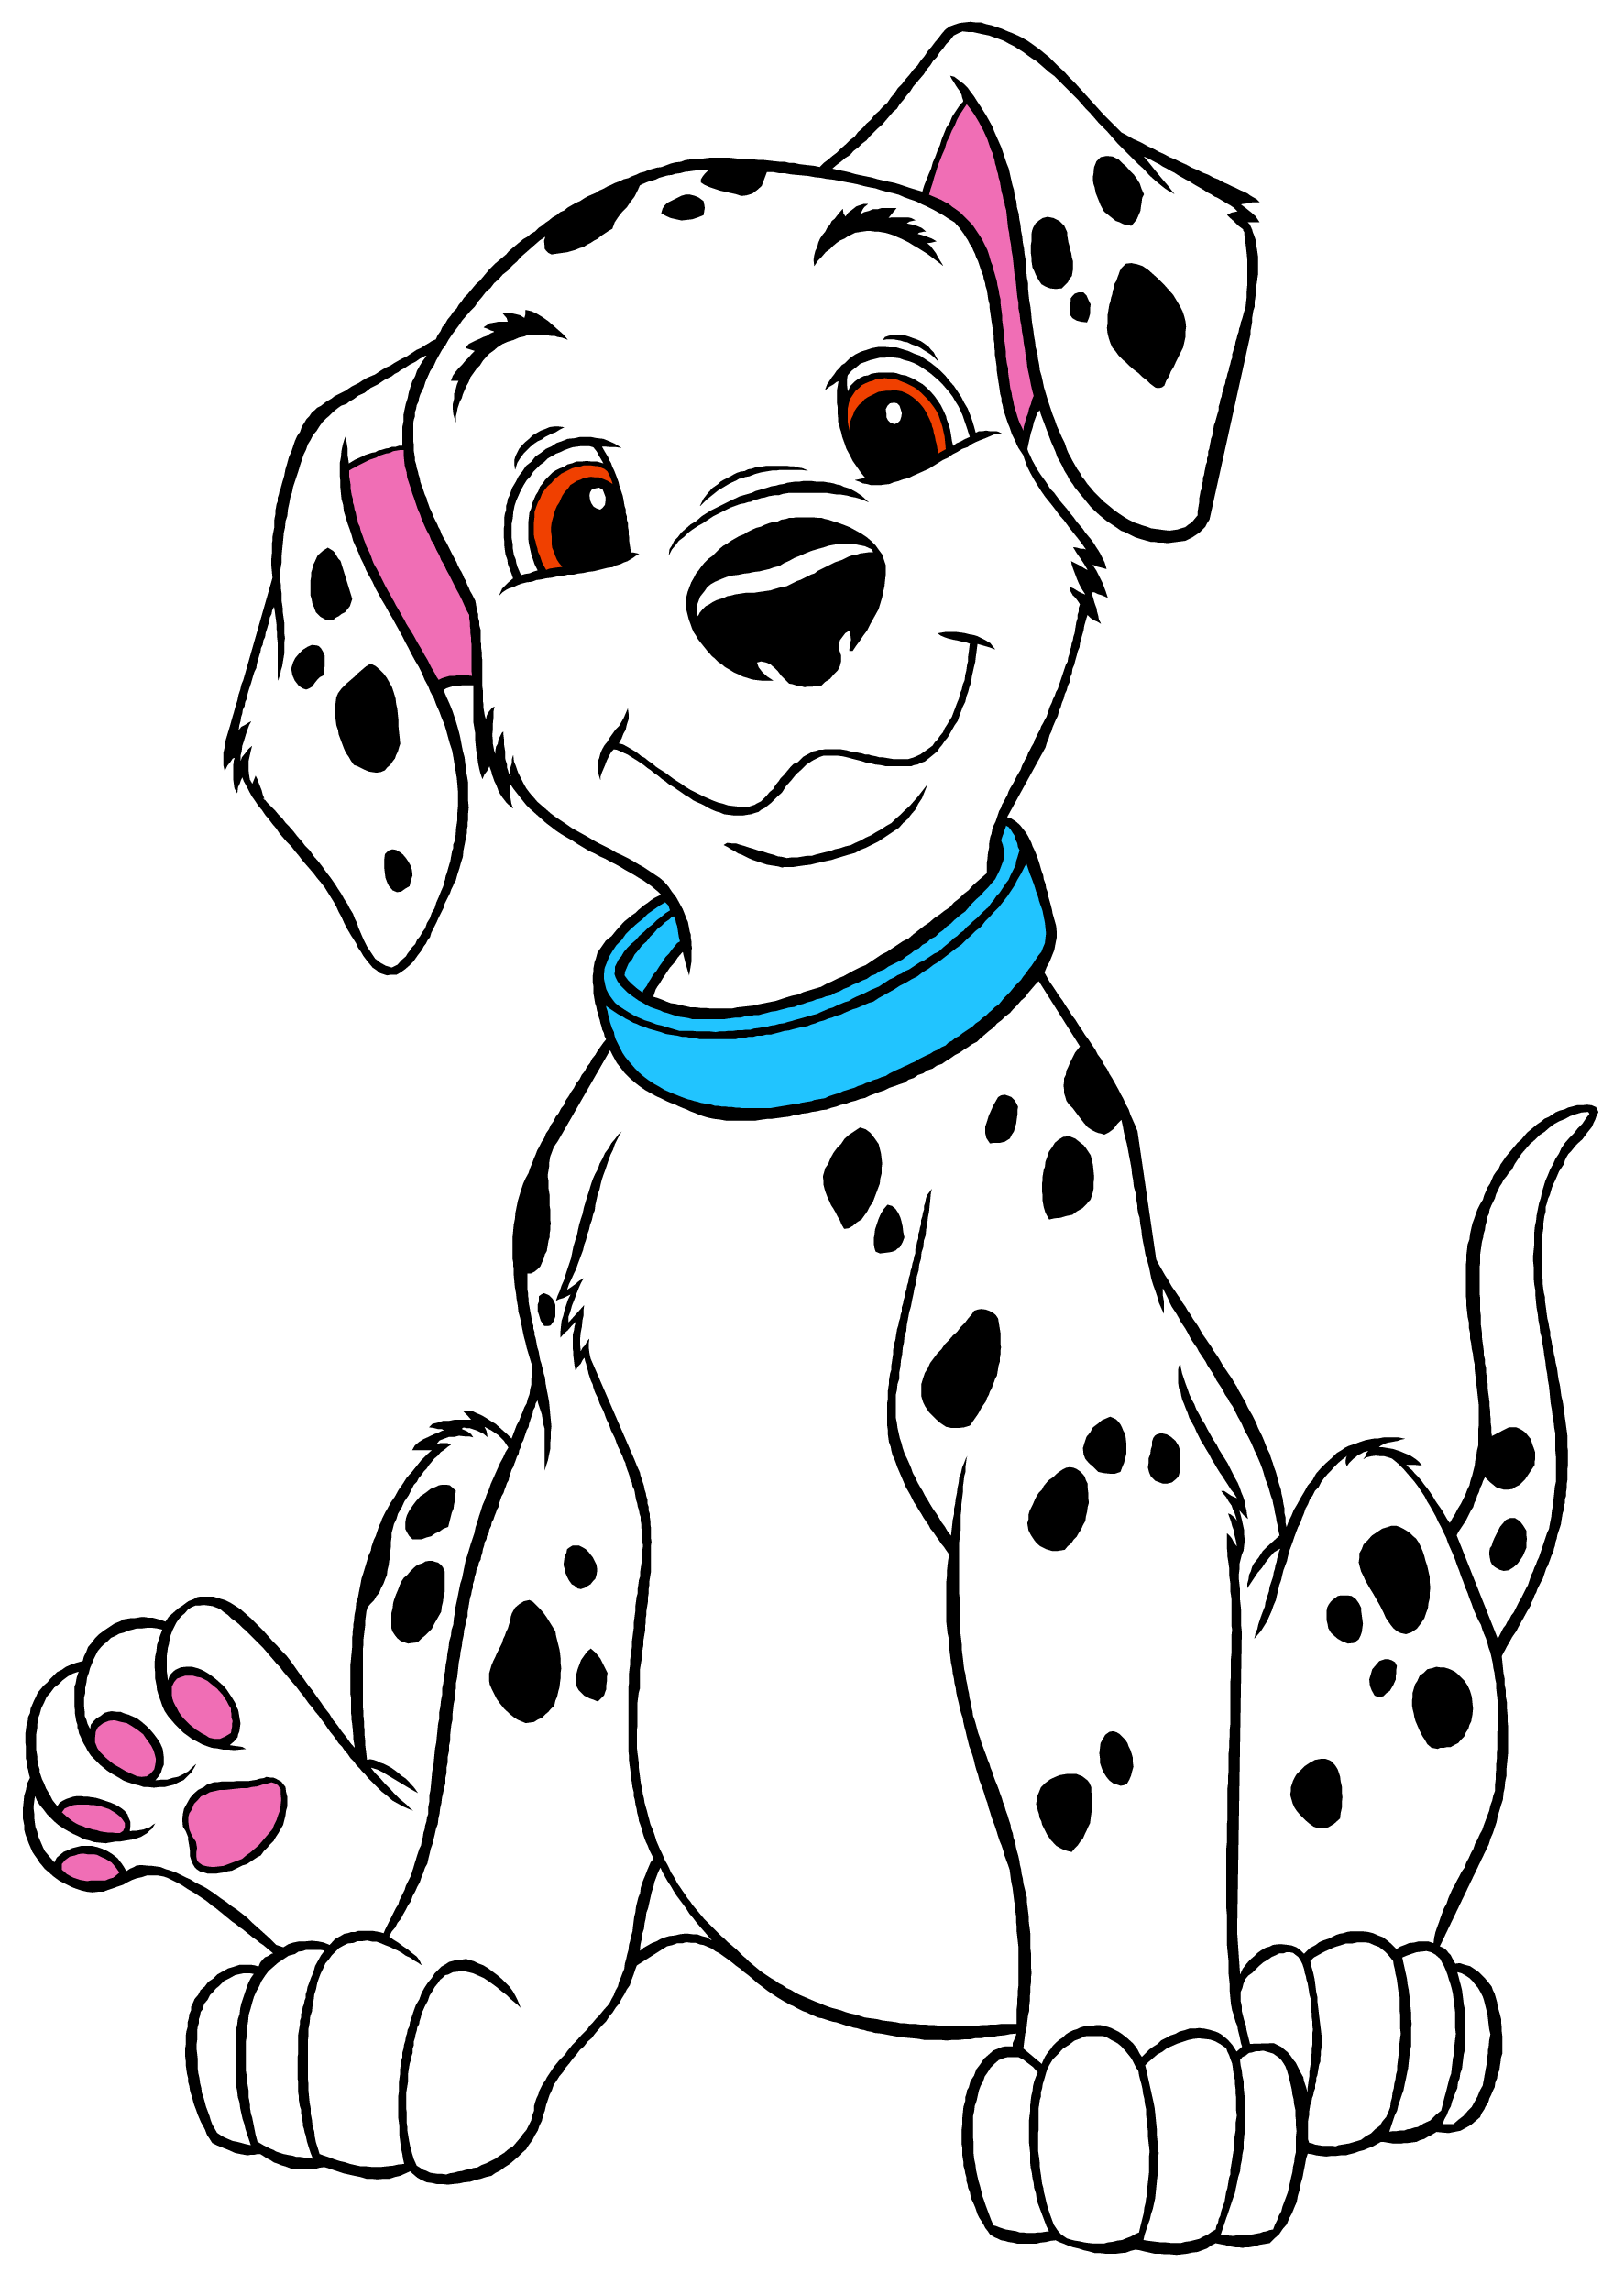 Dalmatian clipart cartoon. Pin by isabelle c